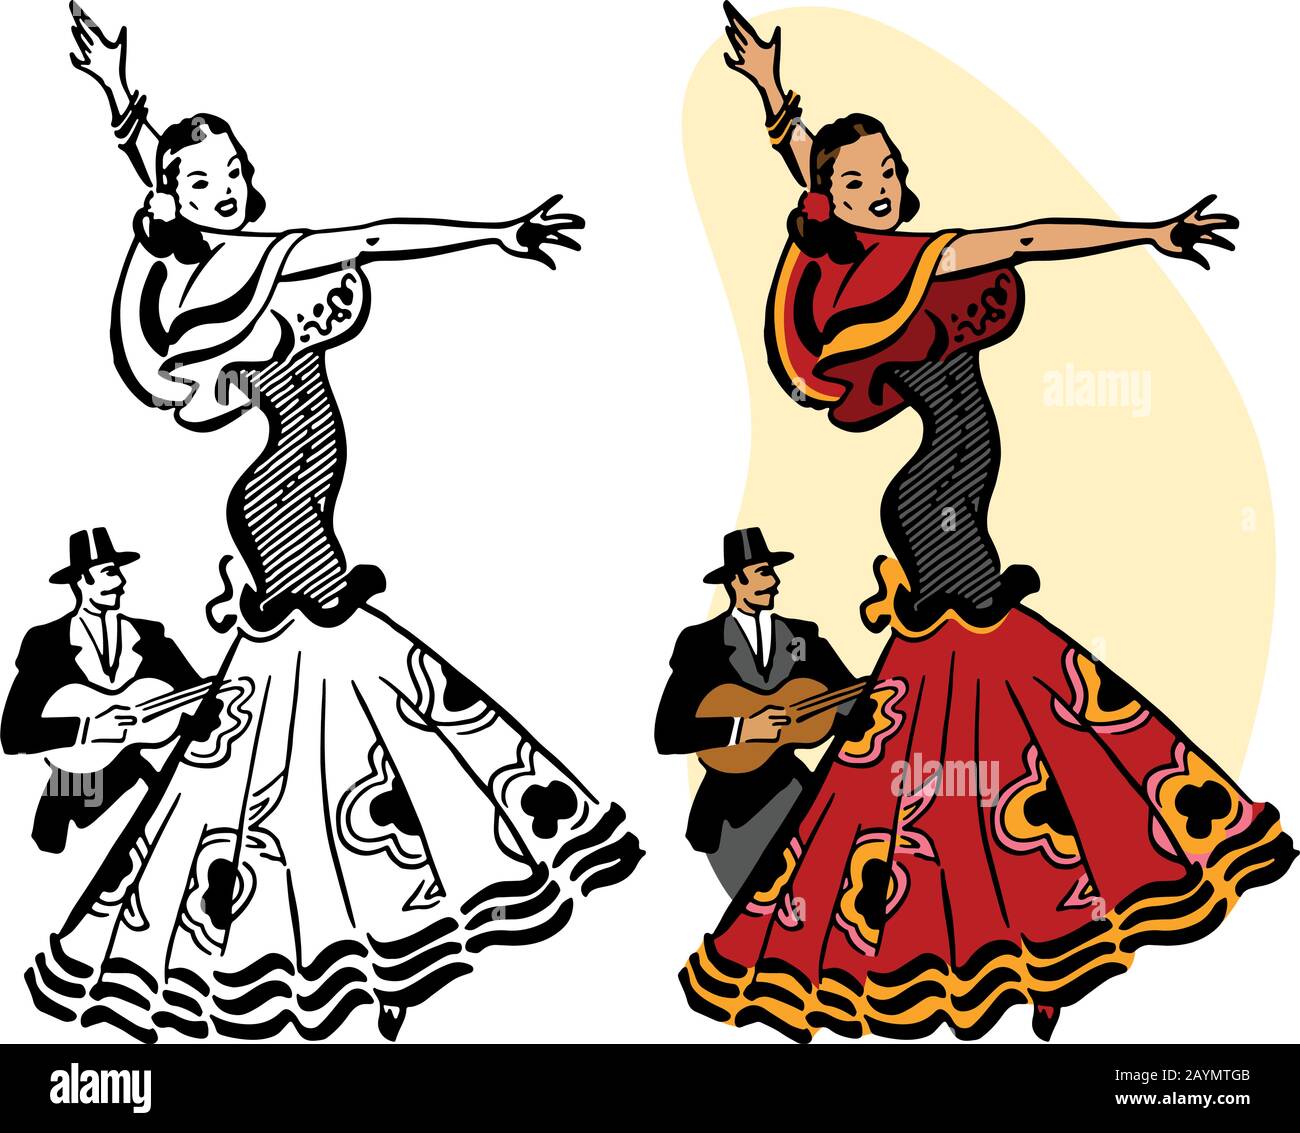 A Spanish woman performing a traditional flamenco dance. Stock Vector